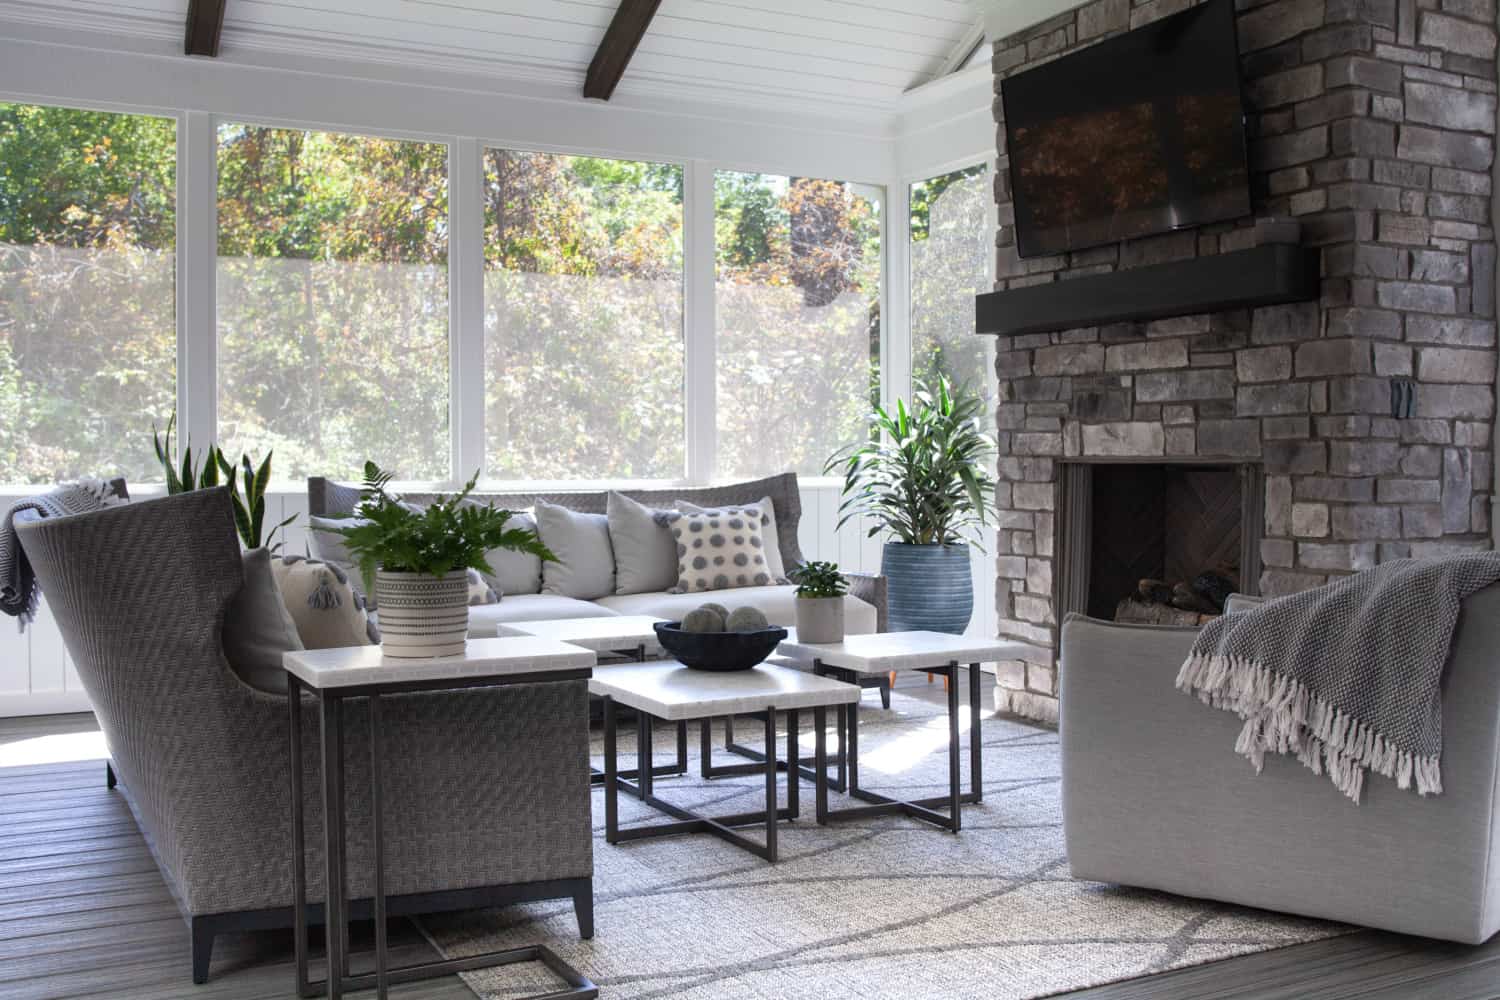 Nicholas Design Build | An outdoor living room with a fireplace and tv.